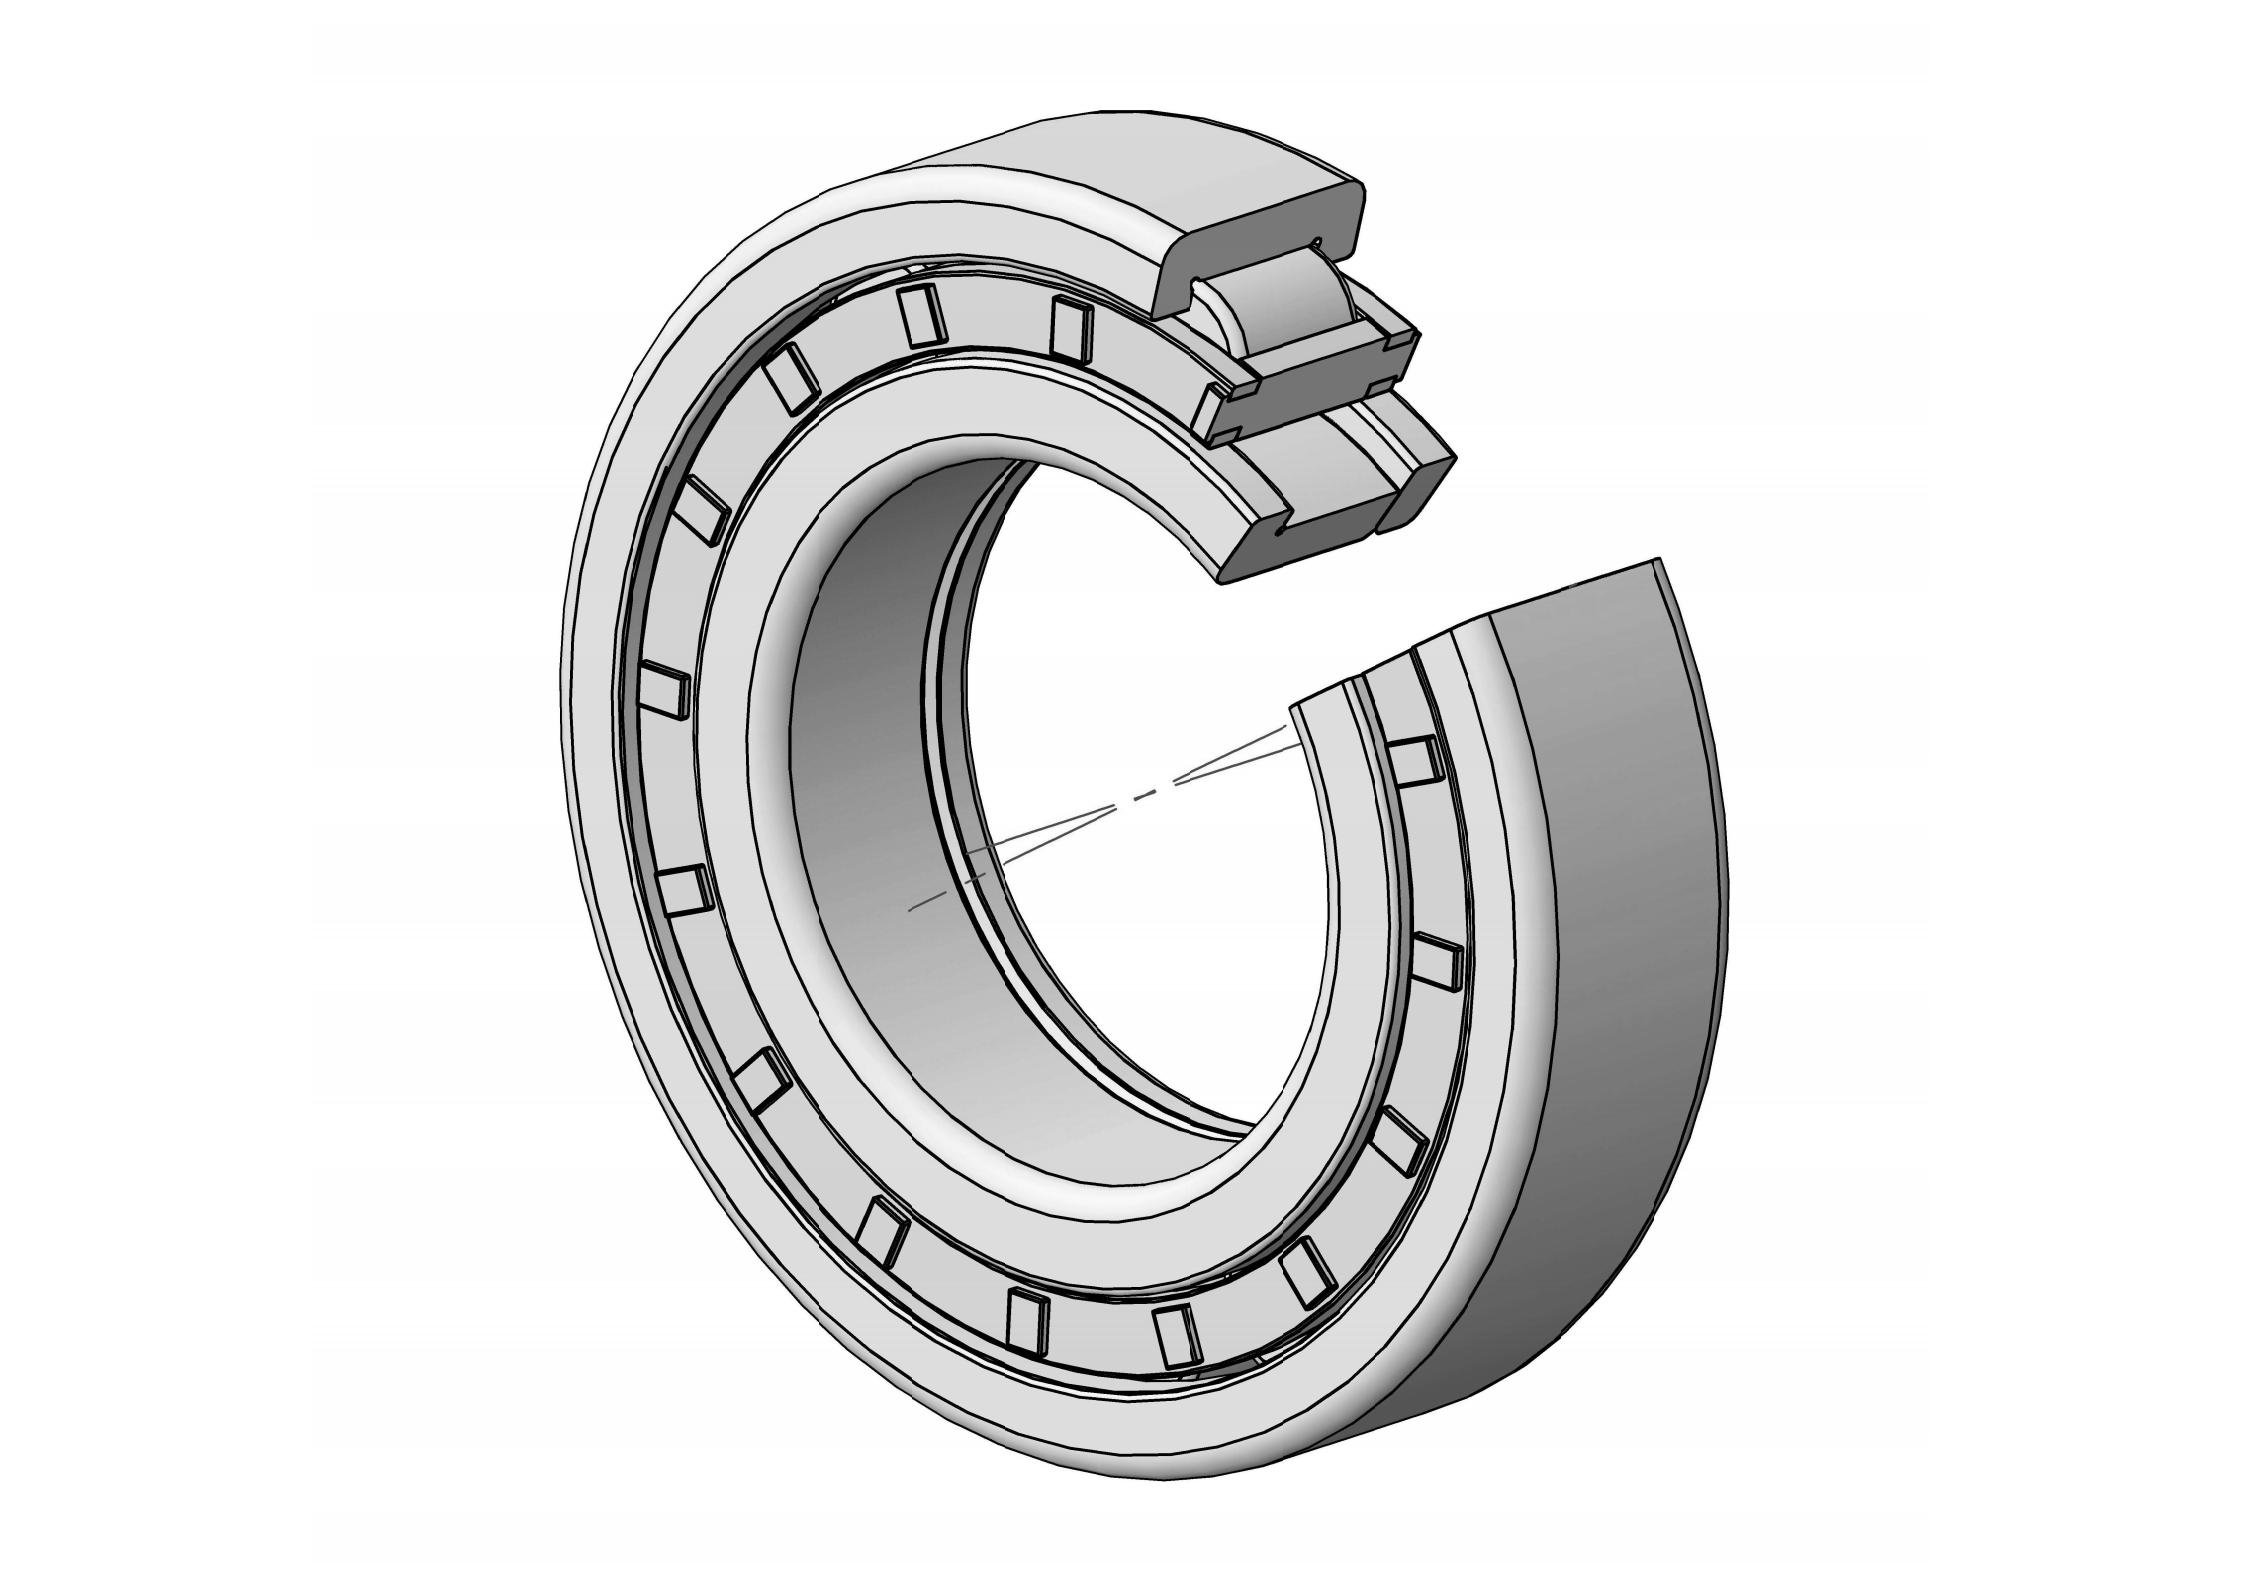 NUP215-E Single Row Cylindrical roller bearing 